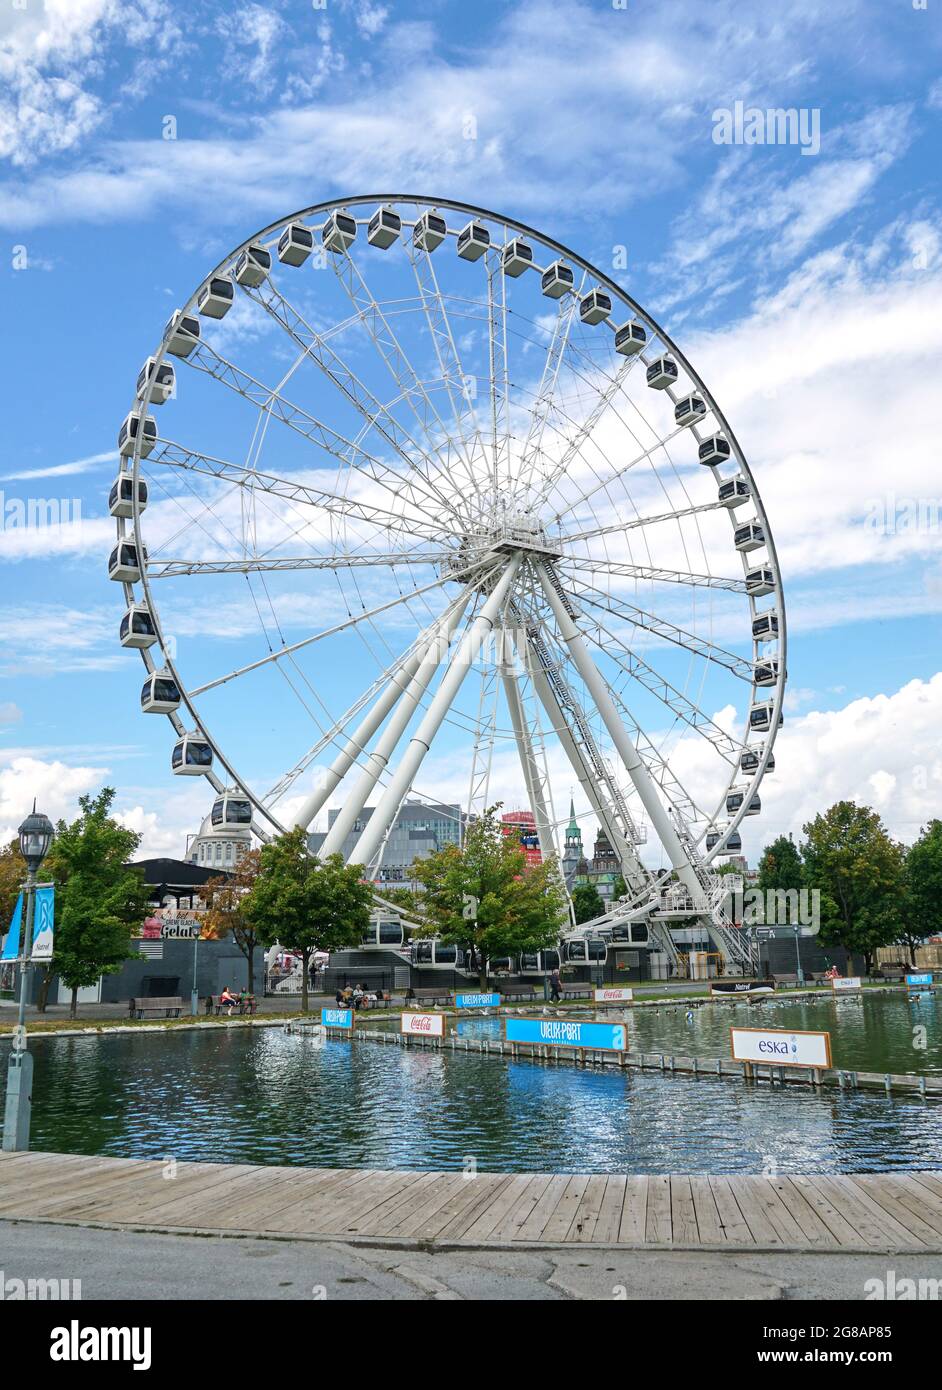 Canada, Montreal - July 11, 2021: Scenic view of ferris wheel La Grande Roue de Montreal in Old Port of Montreal over blue skies and clouds. The Old P Stock Photo